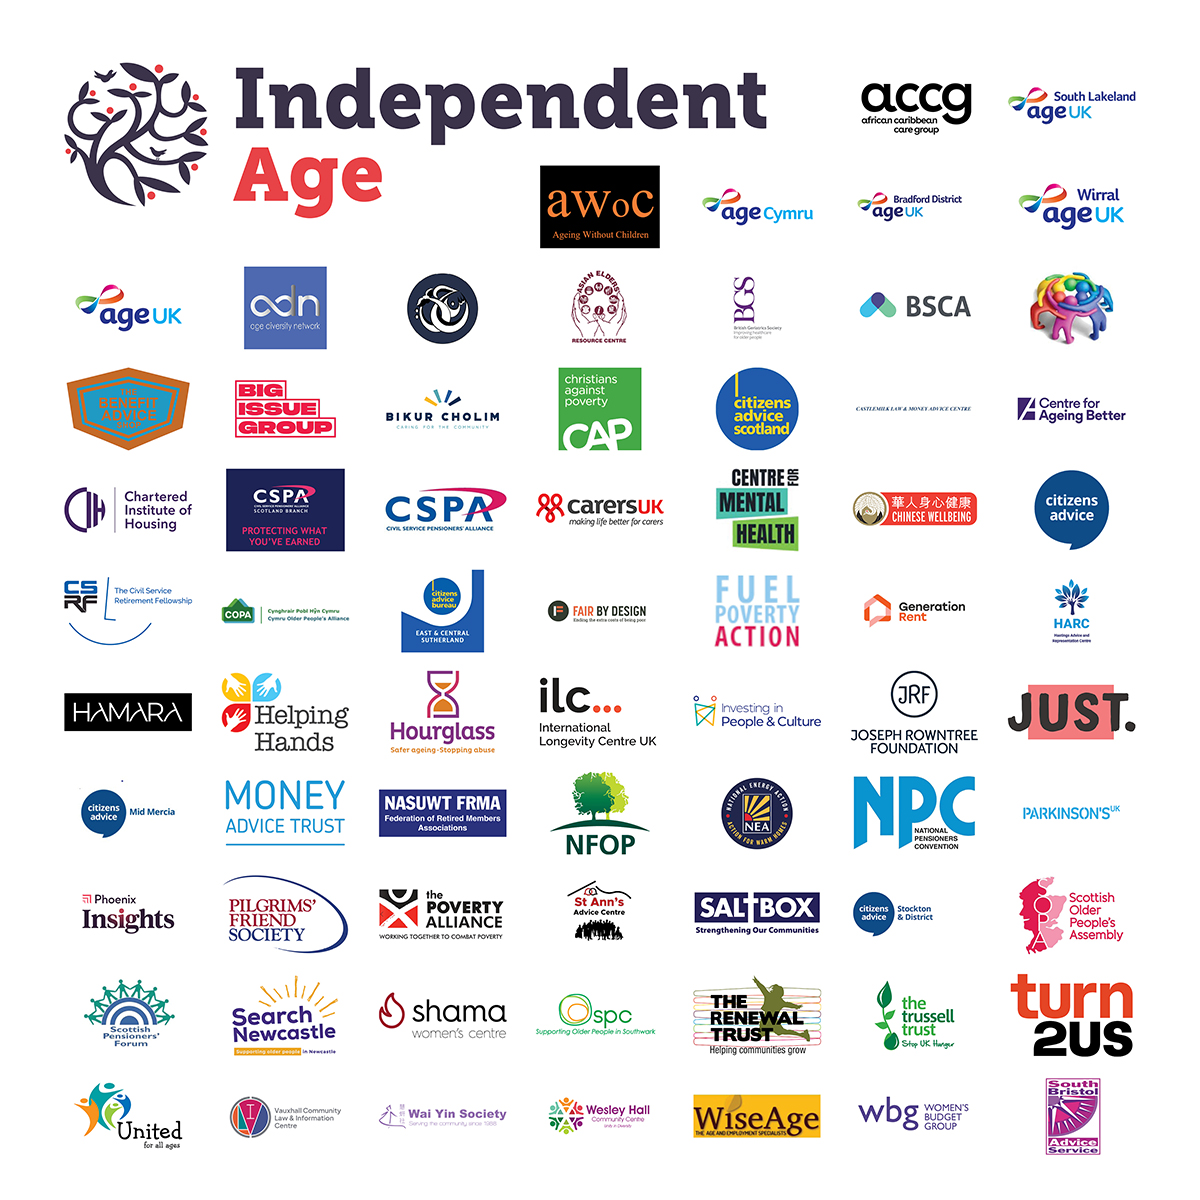 In the UK, around 2 million older people are cutting essentials and living in cold, damp homes to get by. But poverty in later life is not inevitable. We've signed @IndependentAge's statement of intent so can we tackle pensioner poverty. More info > ow.ly/SAO550Ruorg